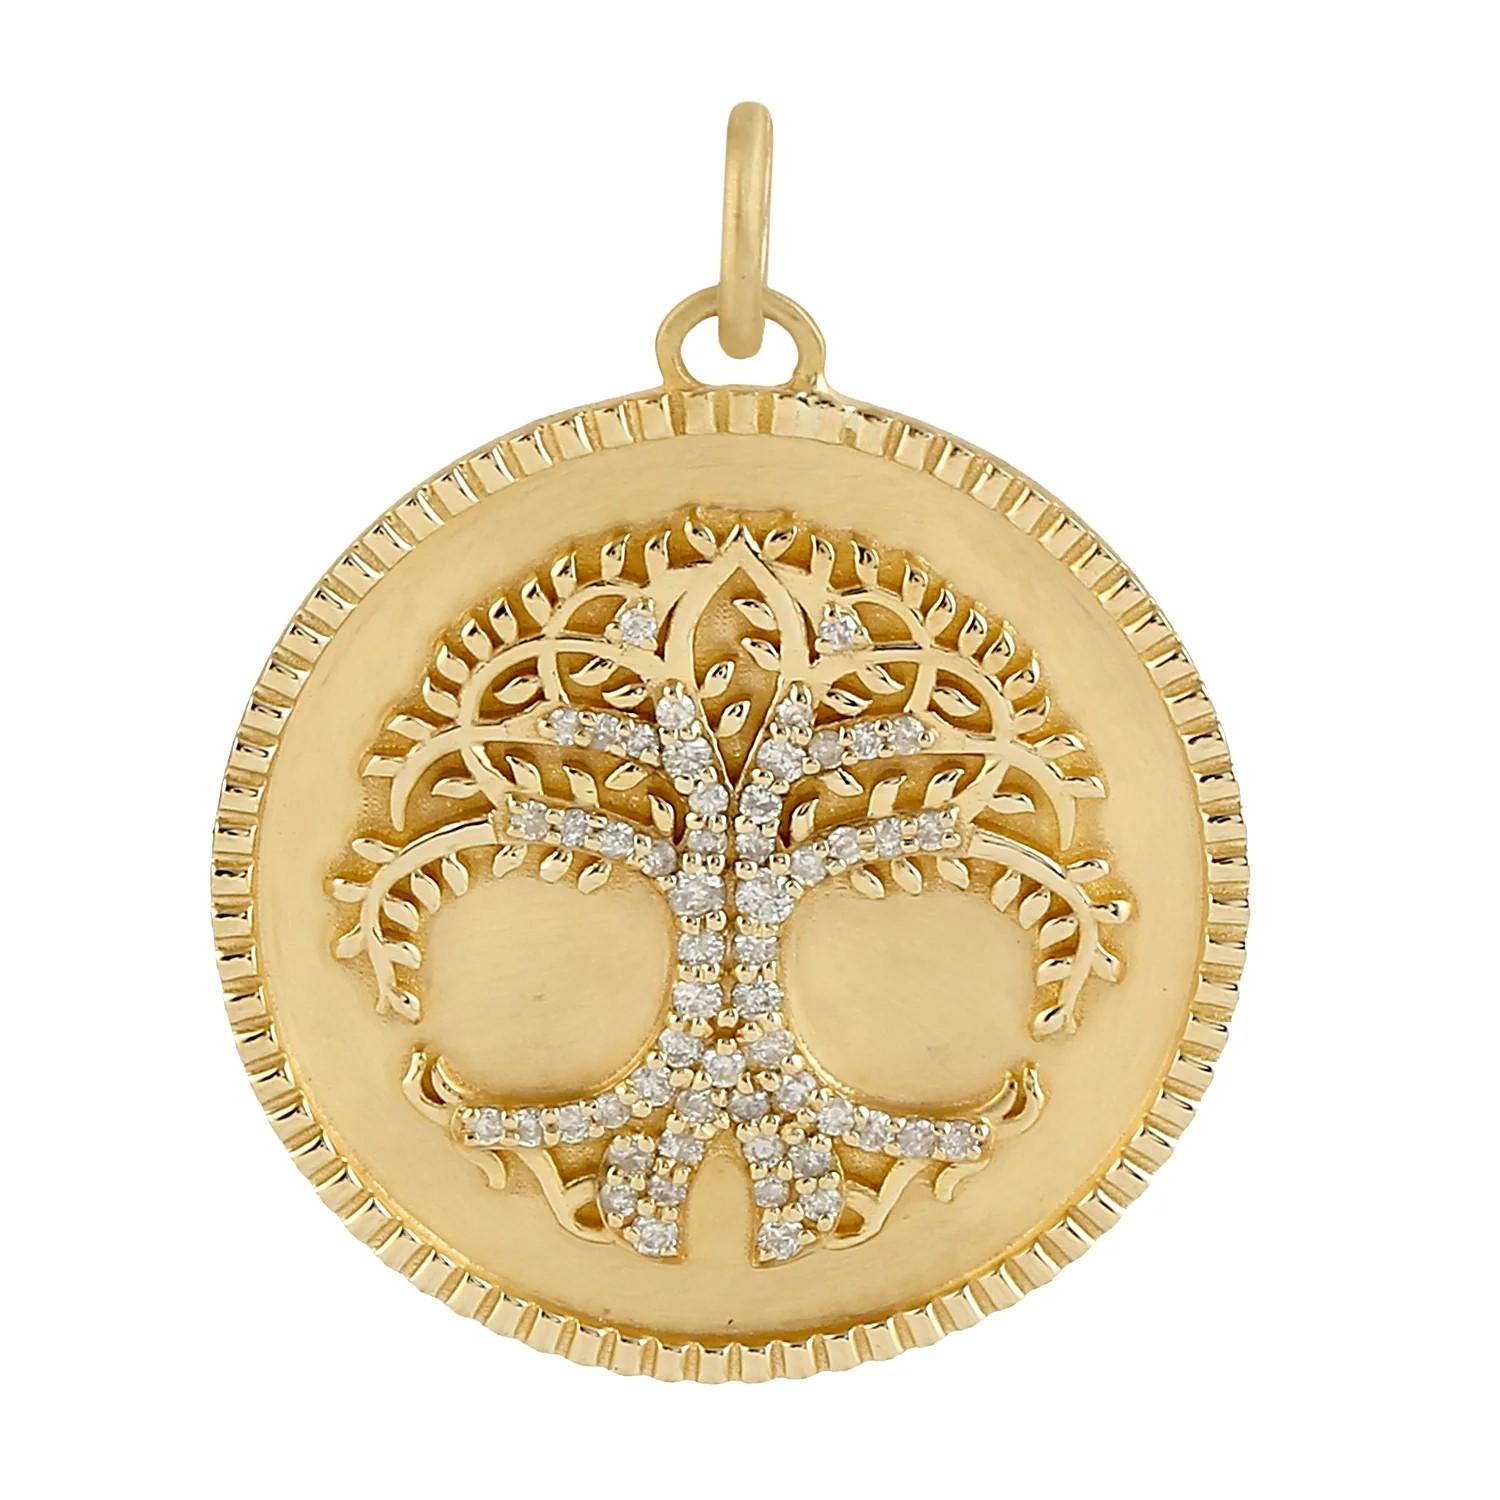 Modern Meghna Jewels Tree of Life Medallion 14K Gold Diamond Charm Pendant Necklace For Sale